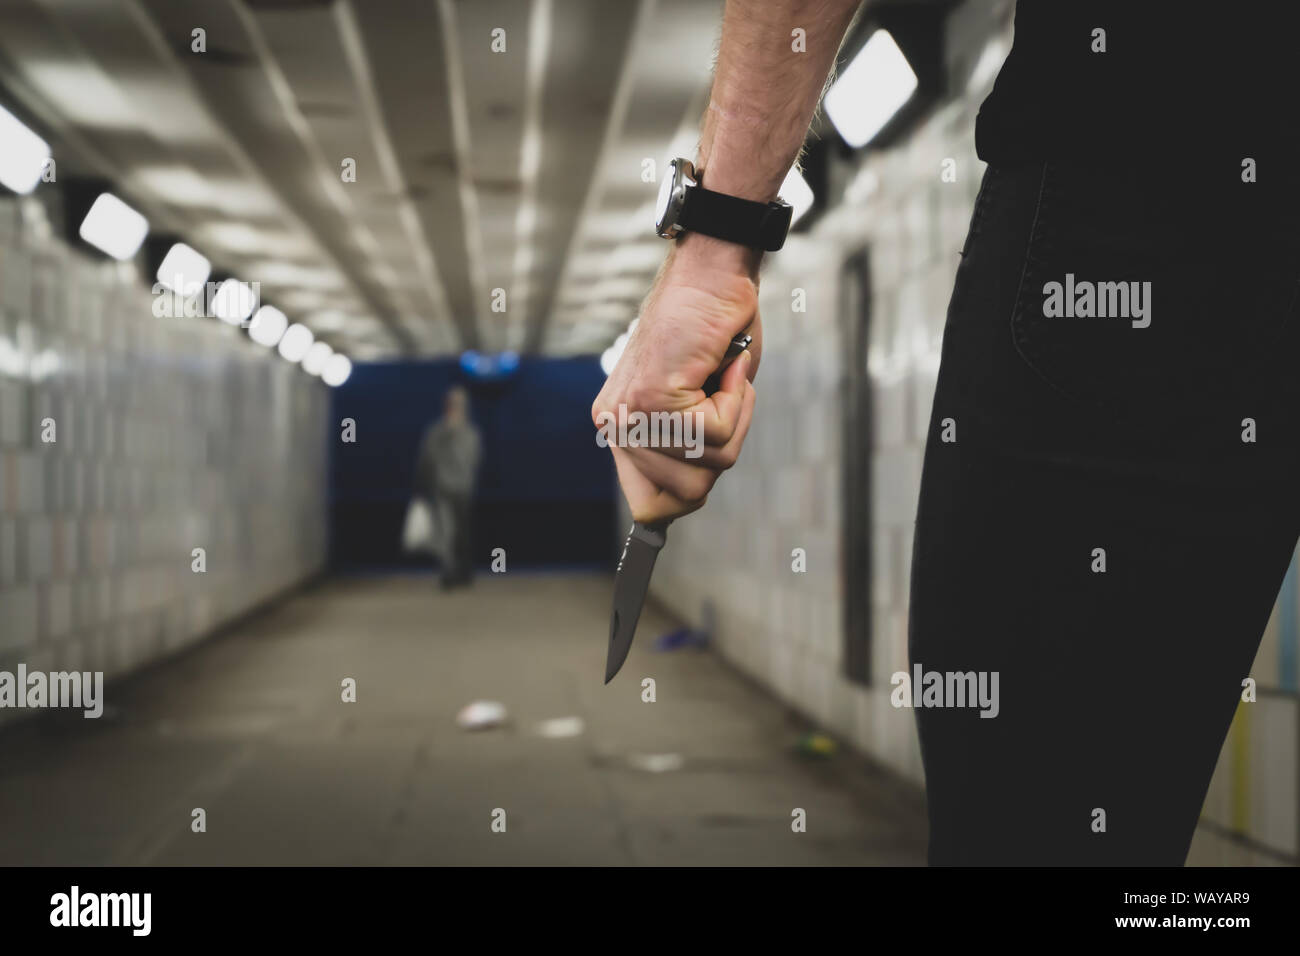 Crime robbery concept. A robber or a killer person with a sharp knife about to commit a homicide in a tunnel. Stock Photo